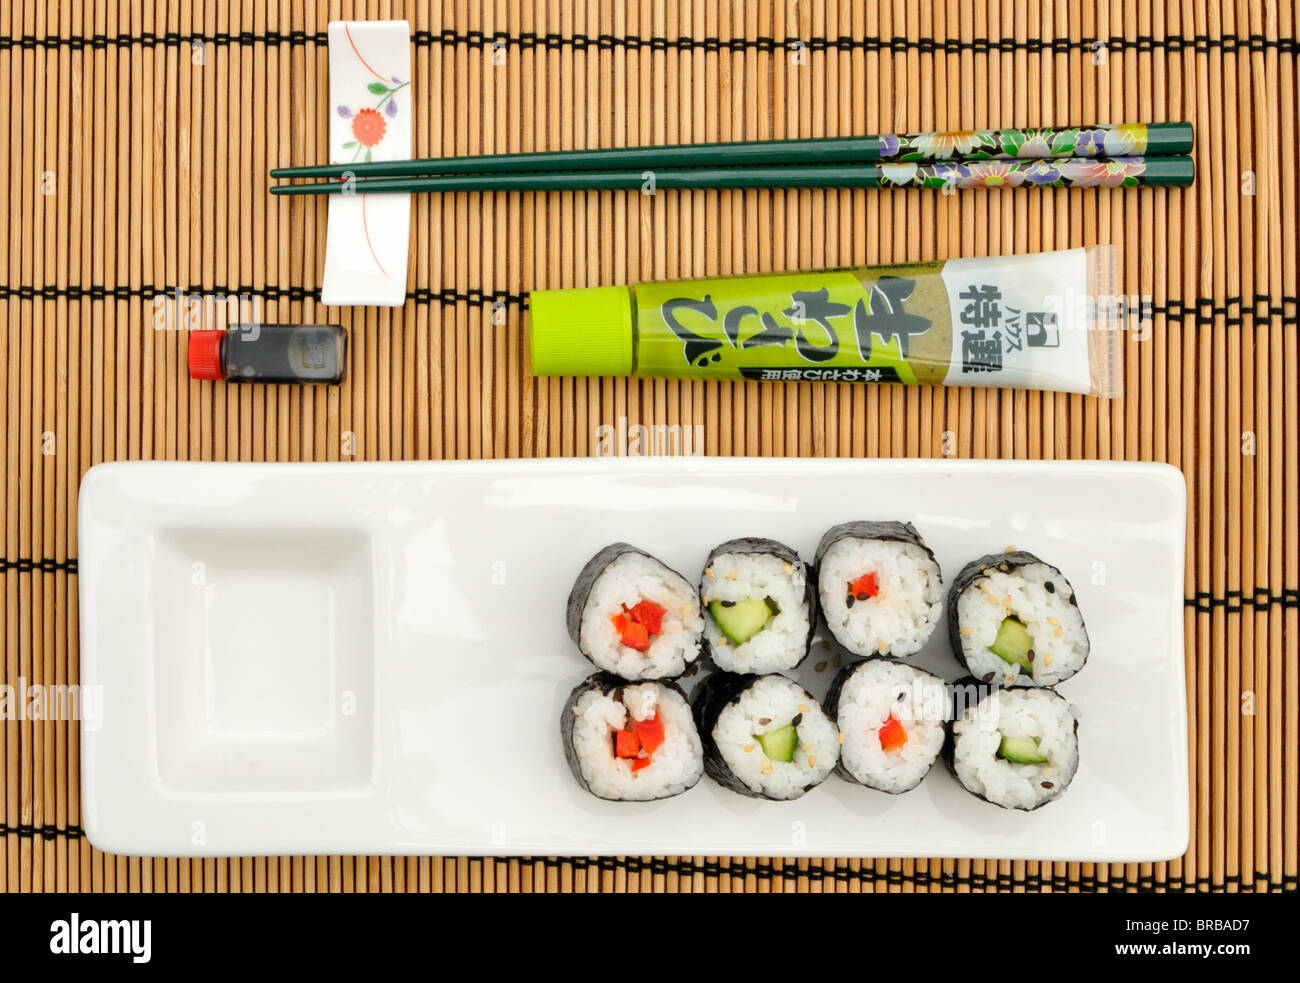 Red pepper and cucumber maki sushi, wasabi, soya sauce and a pair of chopsticks. Stock Photo